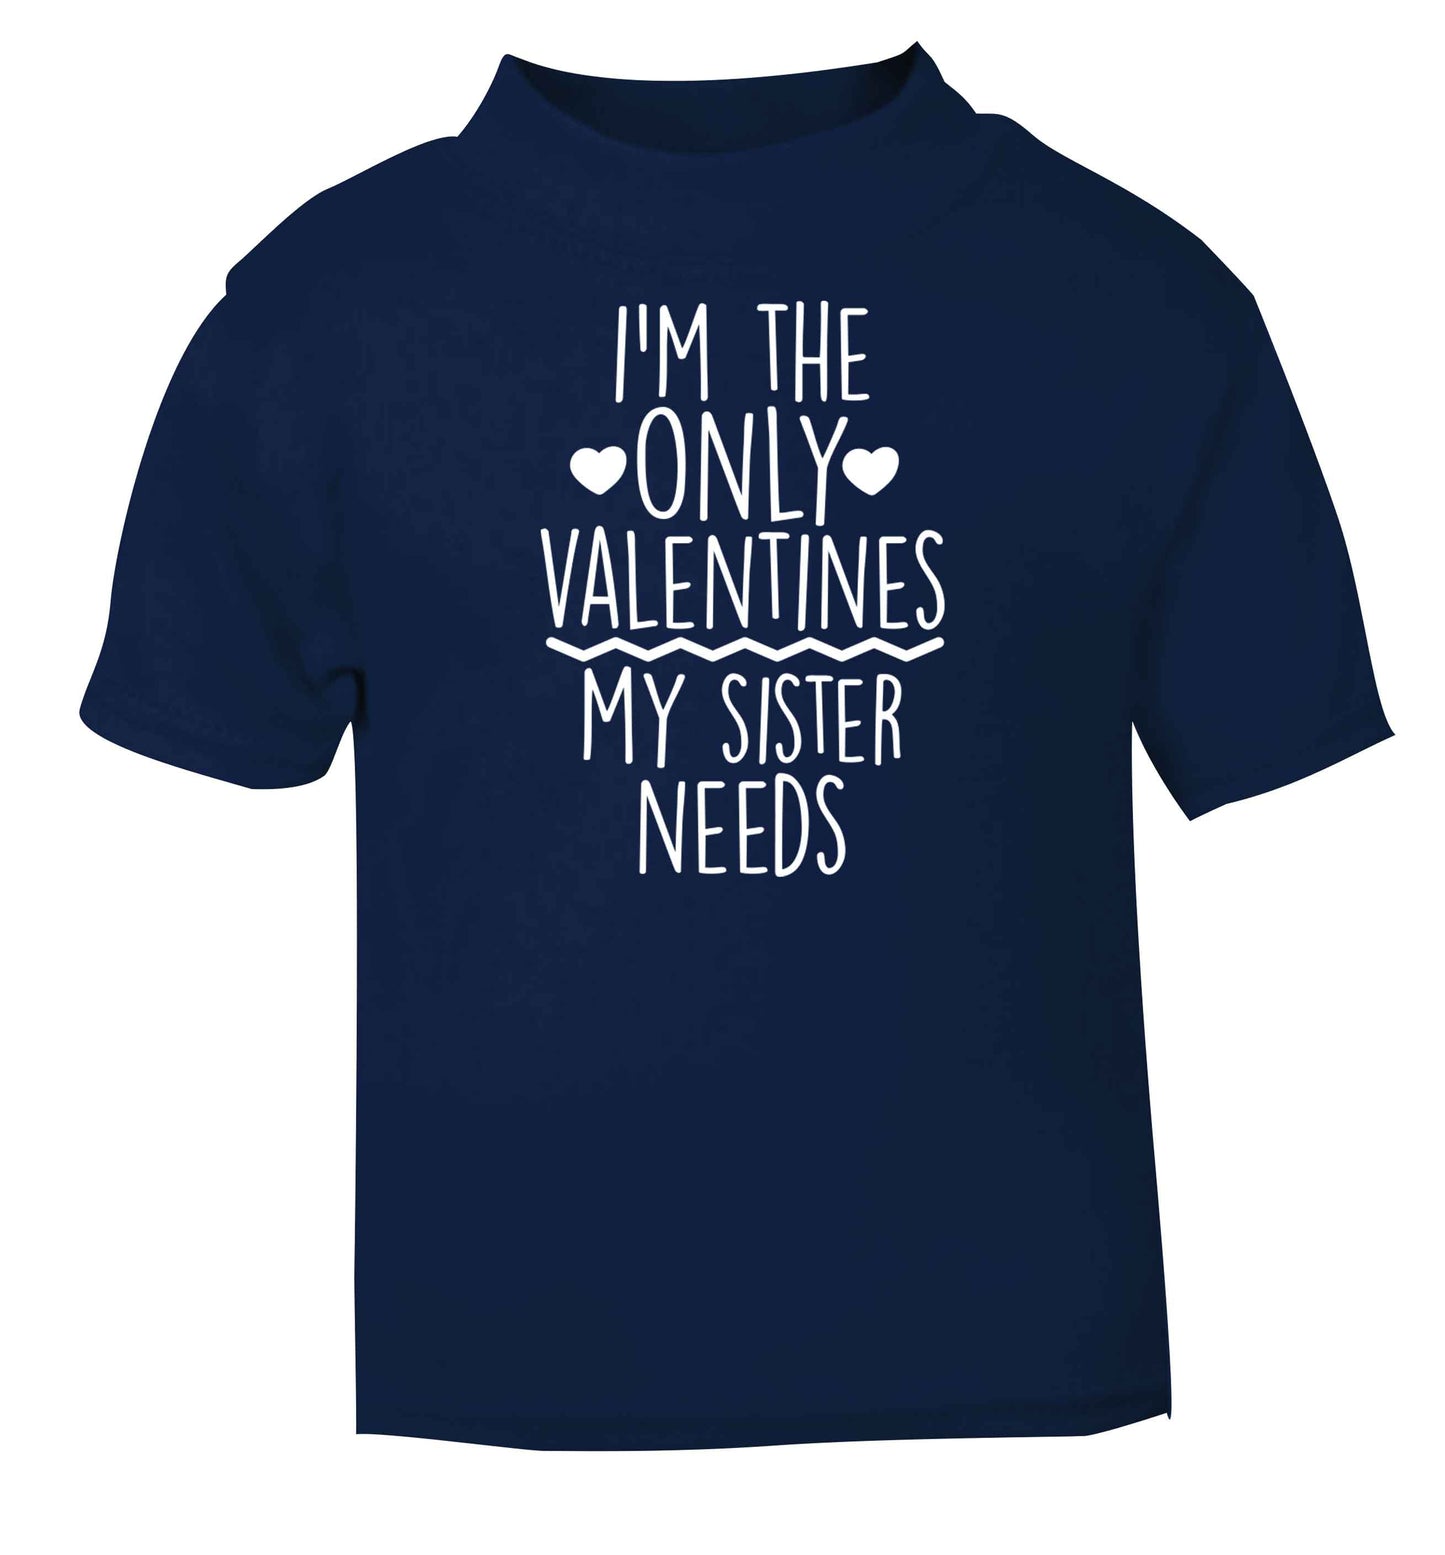 I'm the only valentines my sister needs navy baby toddler Tshirt 2 Years